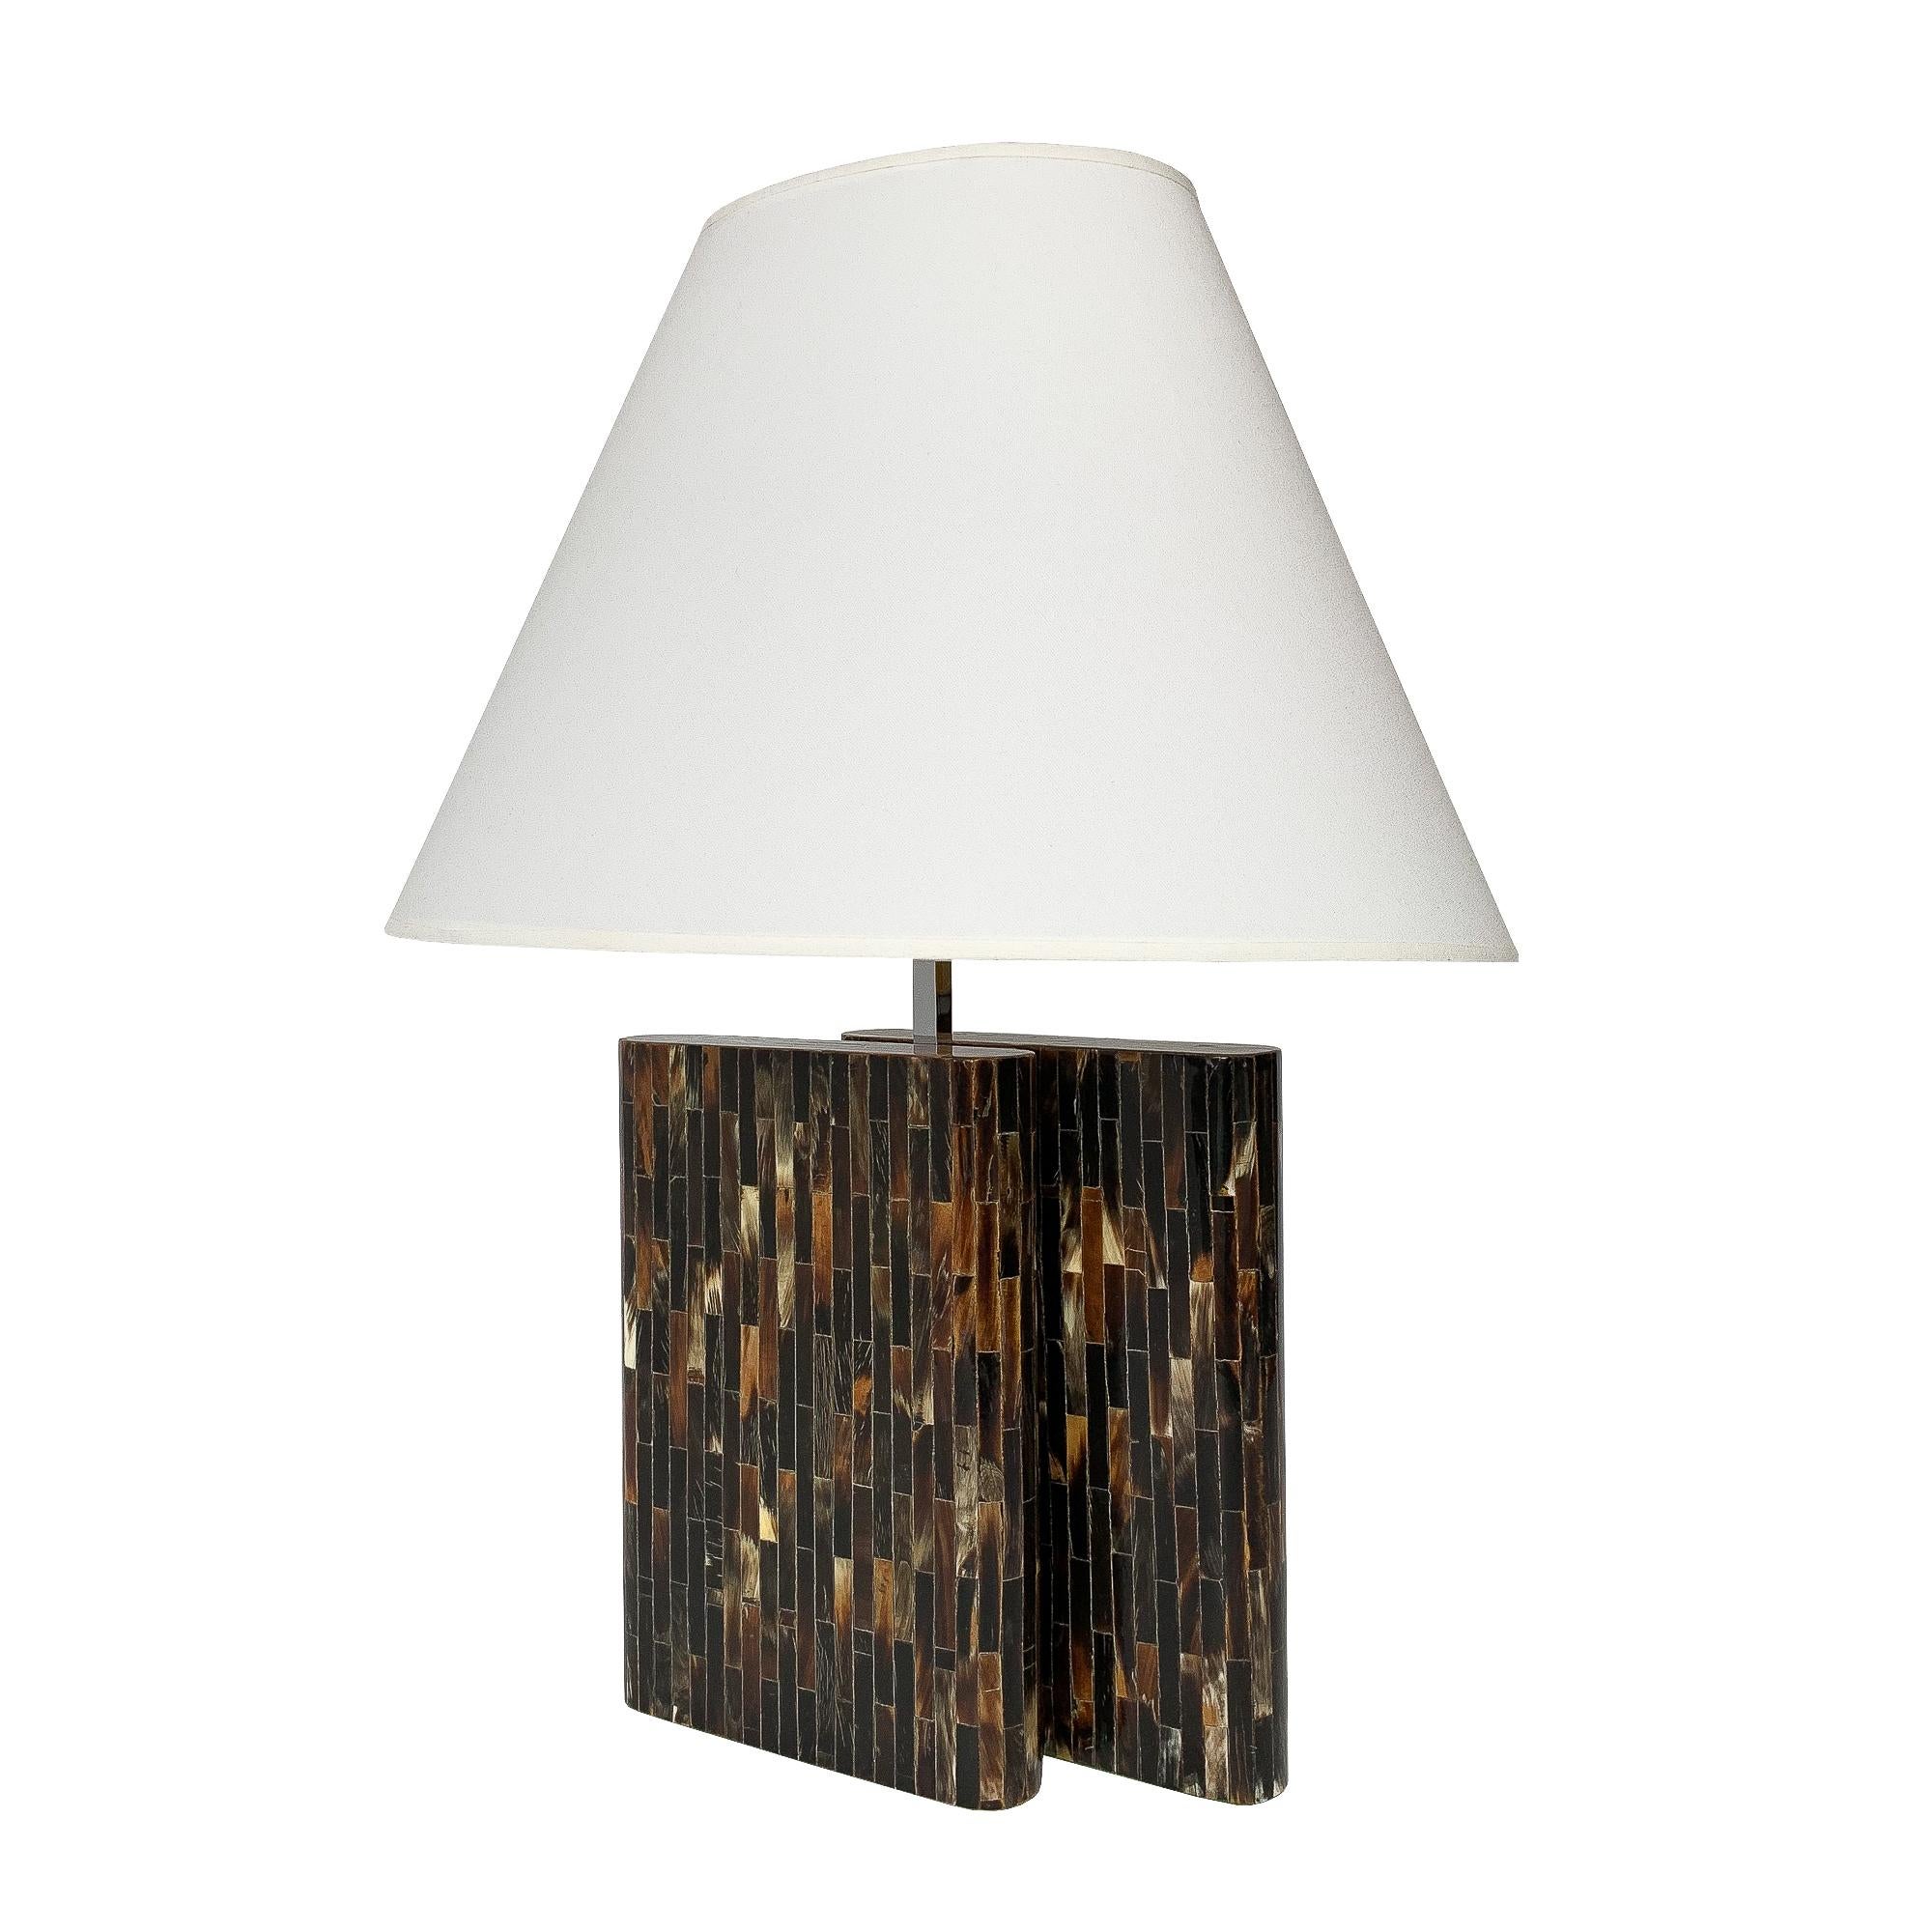 Enrique Garcel Tessellated Horn Table Lamp